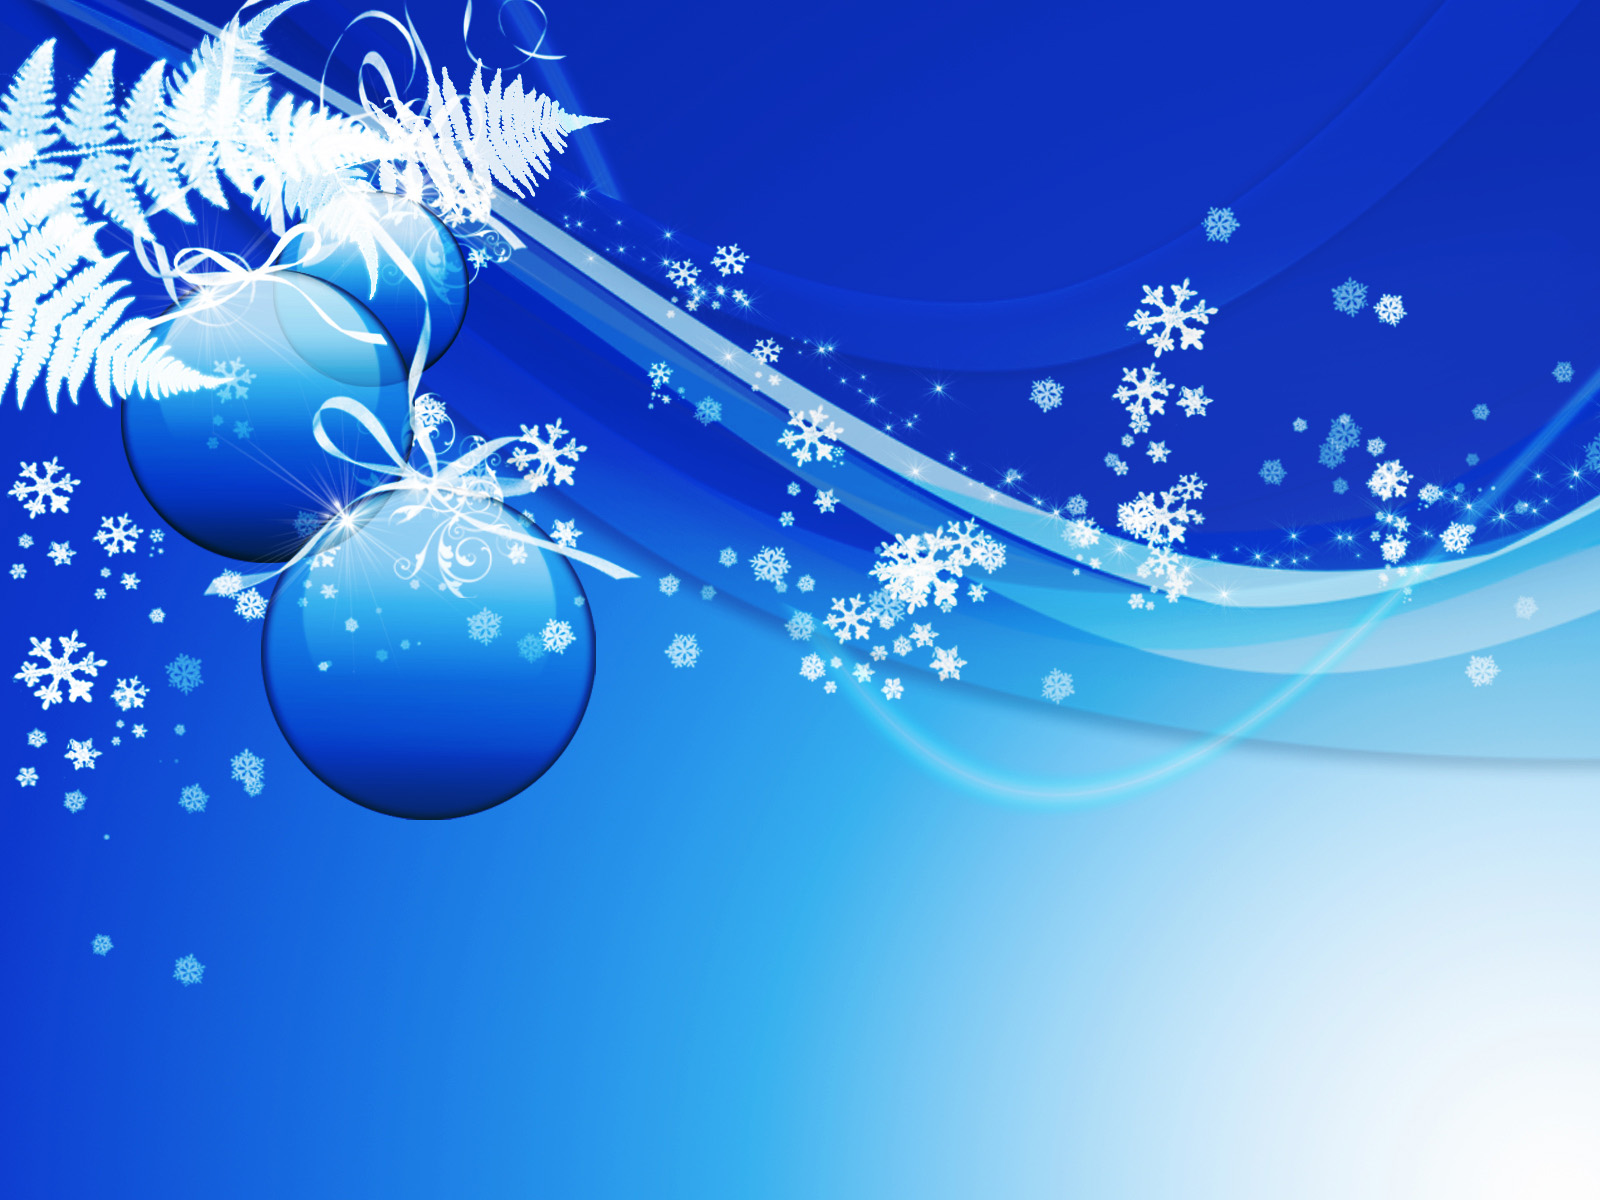 Winter christmas holiday wallpapers